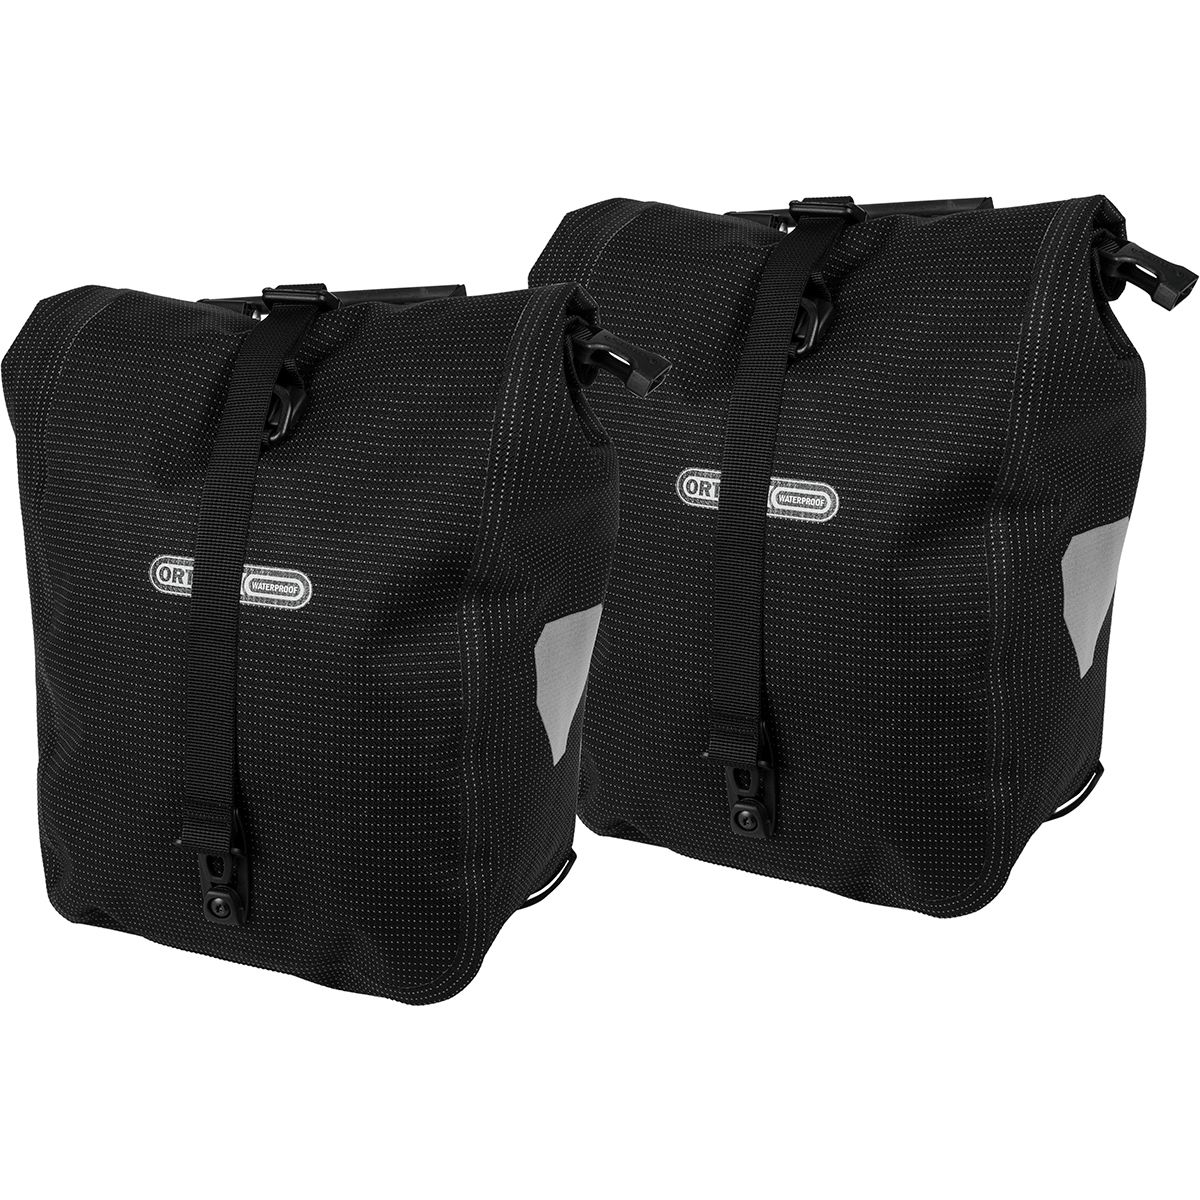 Ortlieb Sport-Roller High-Visibility Panniers - Pair